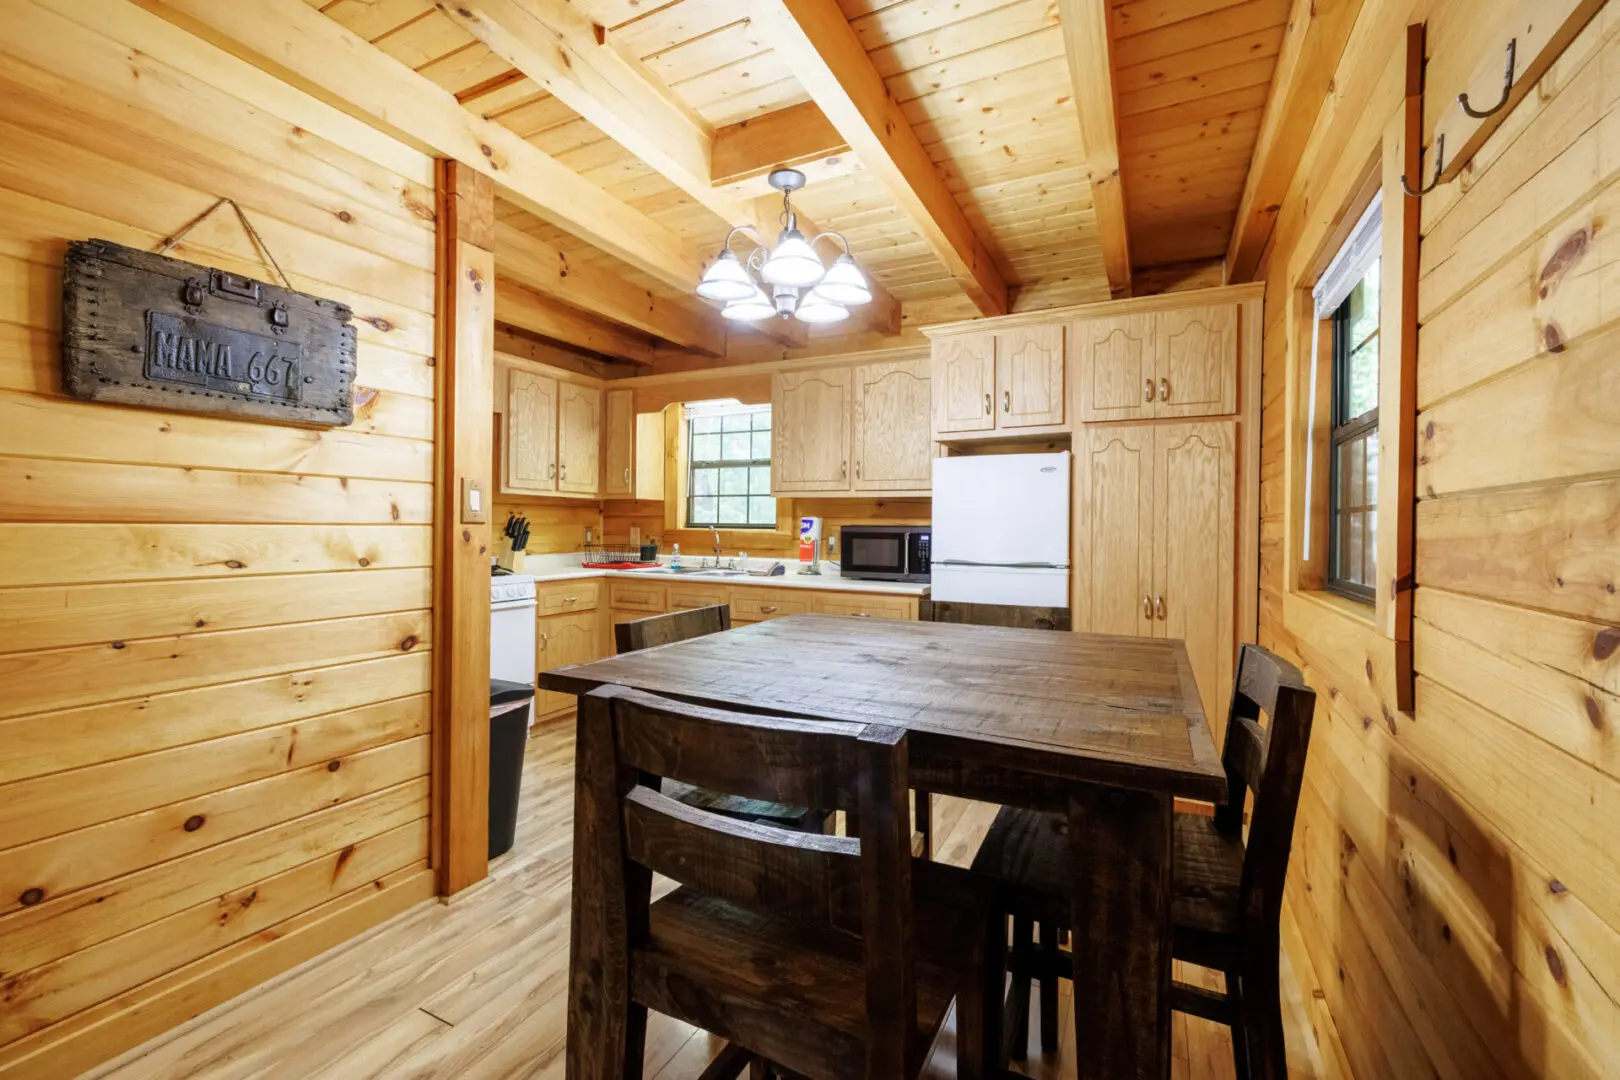 A kitchen in a log cabin with a table and chairs.